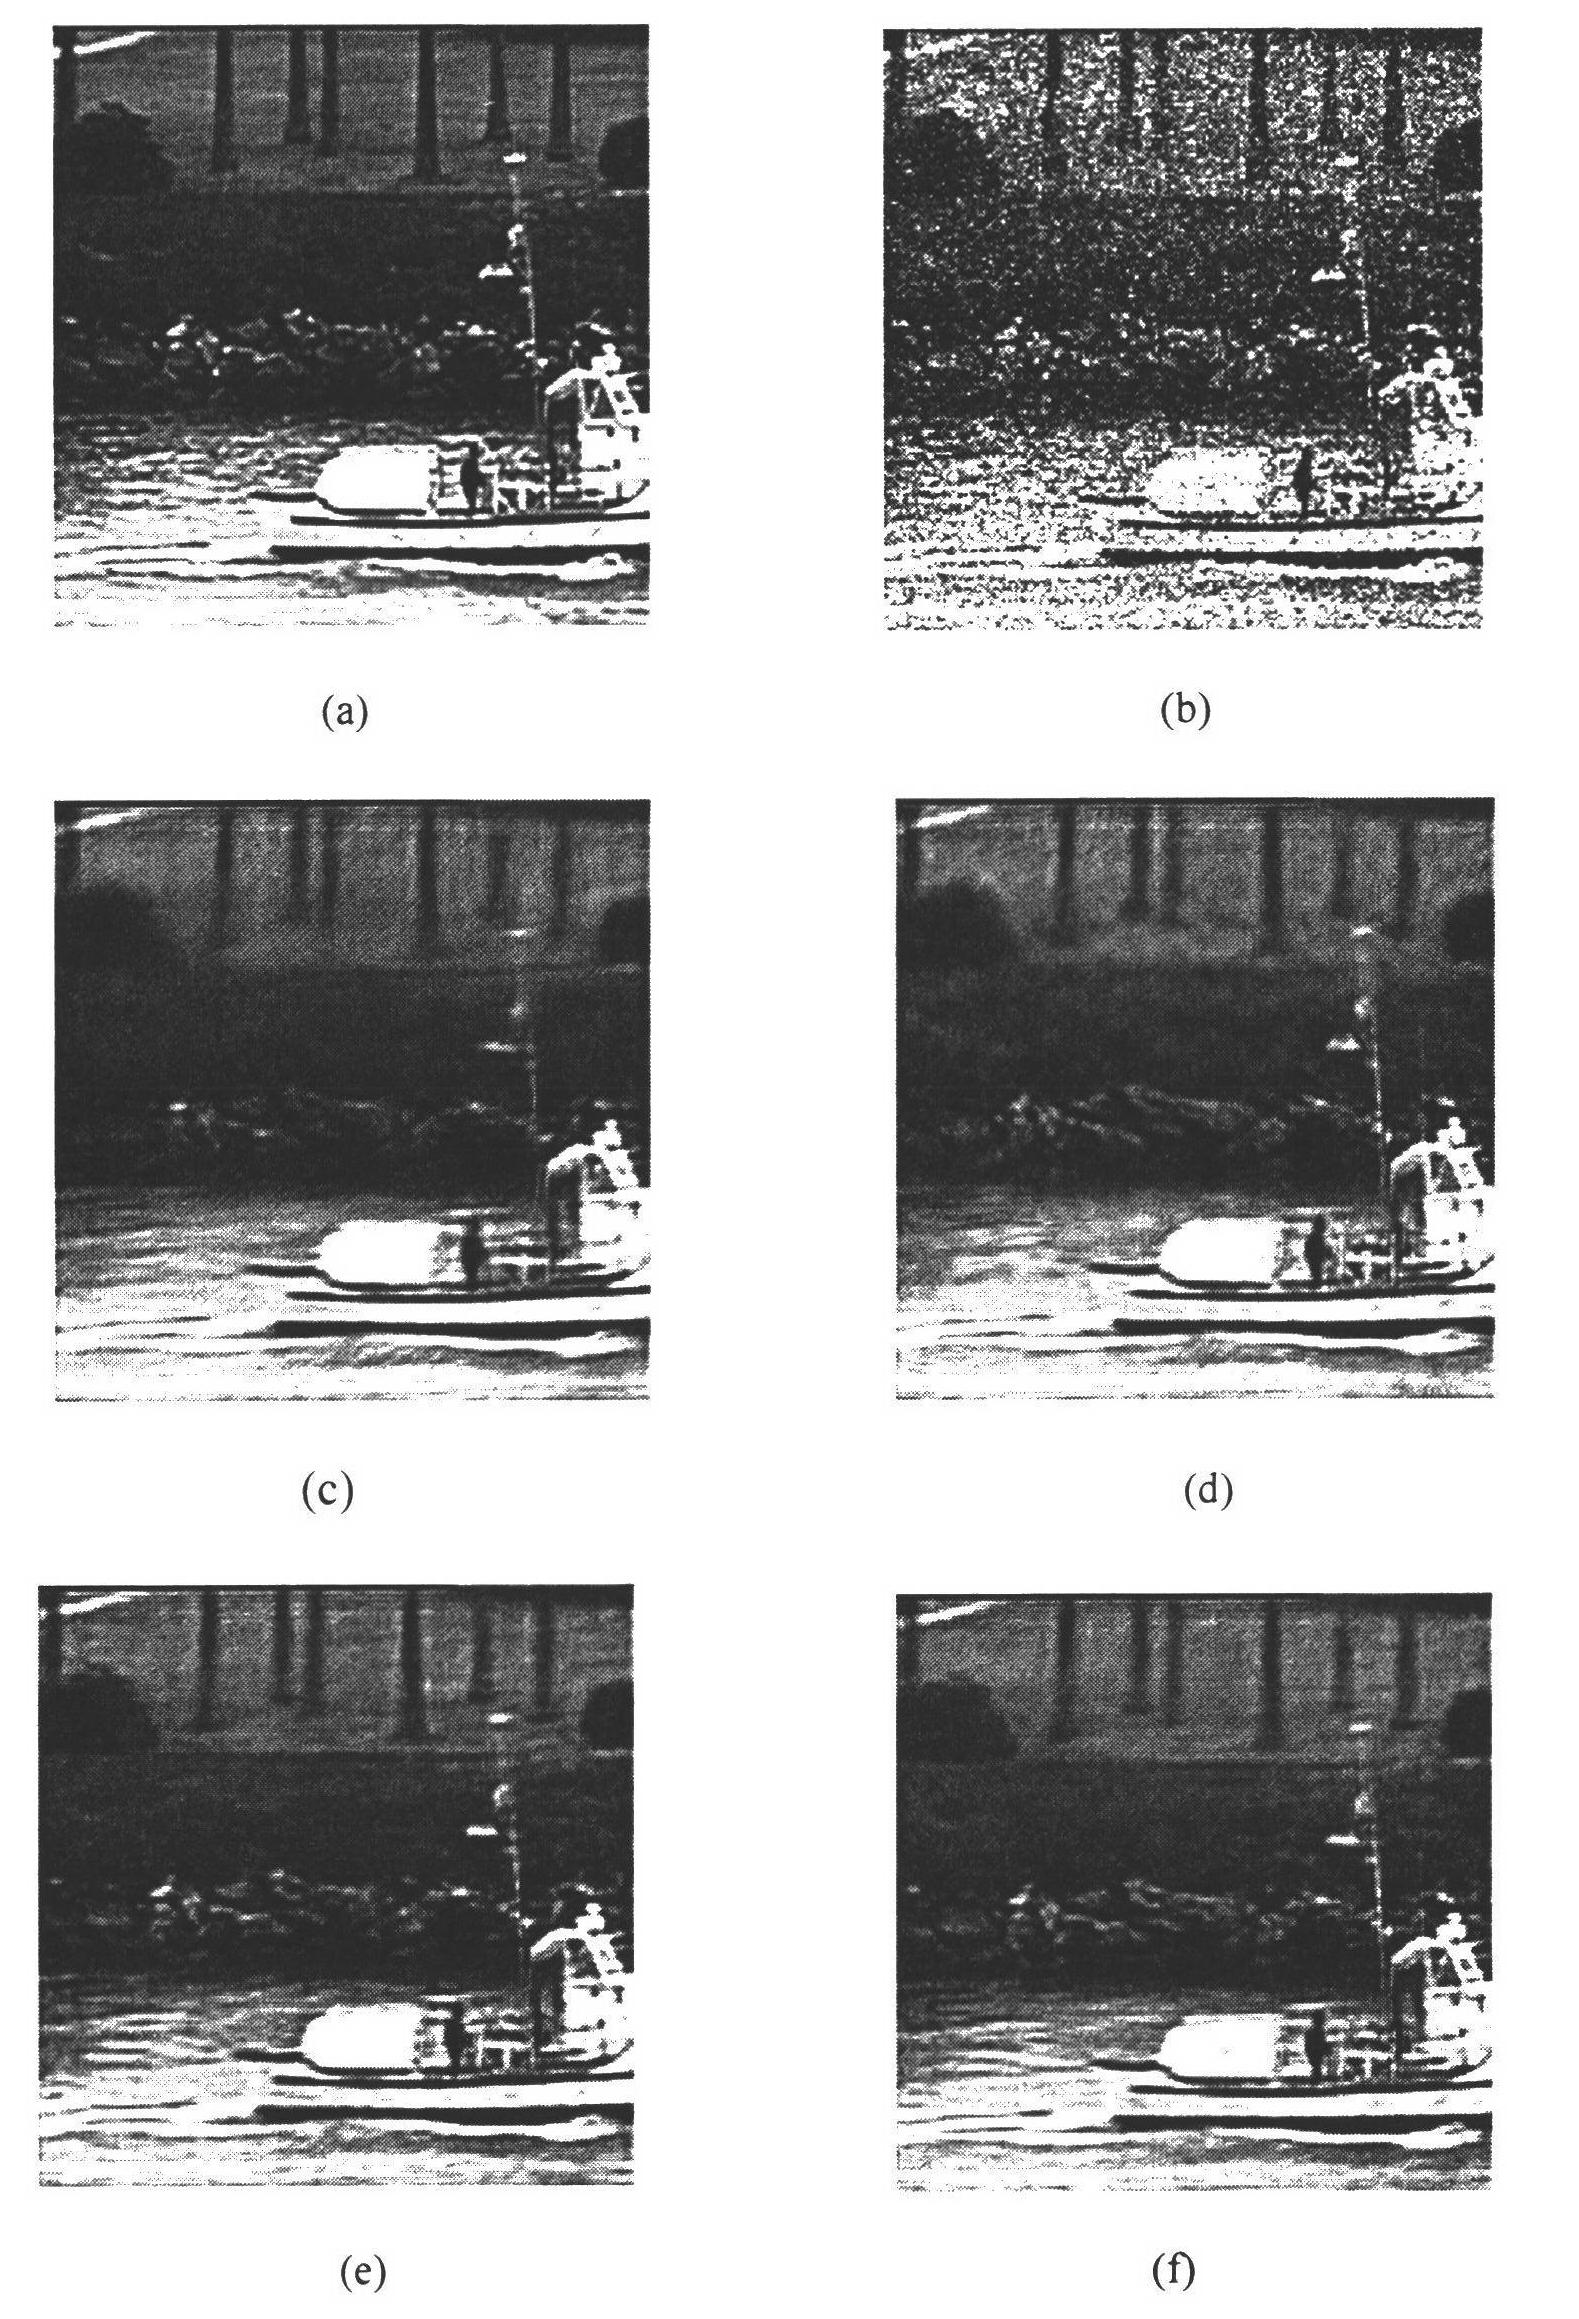 Method for denoising video based on surfacelet conversion characteristic